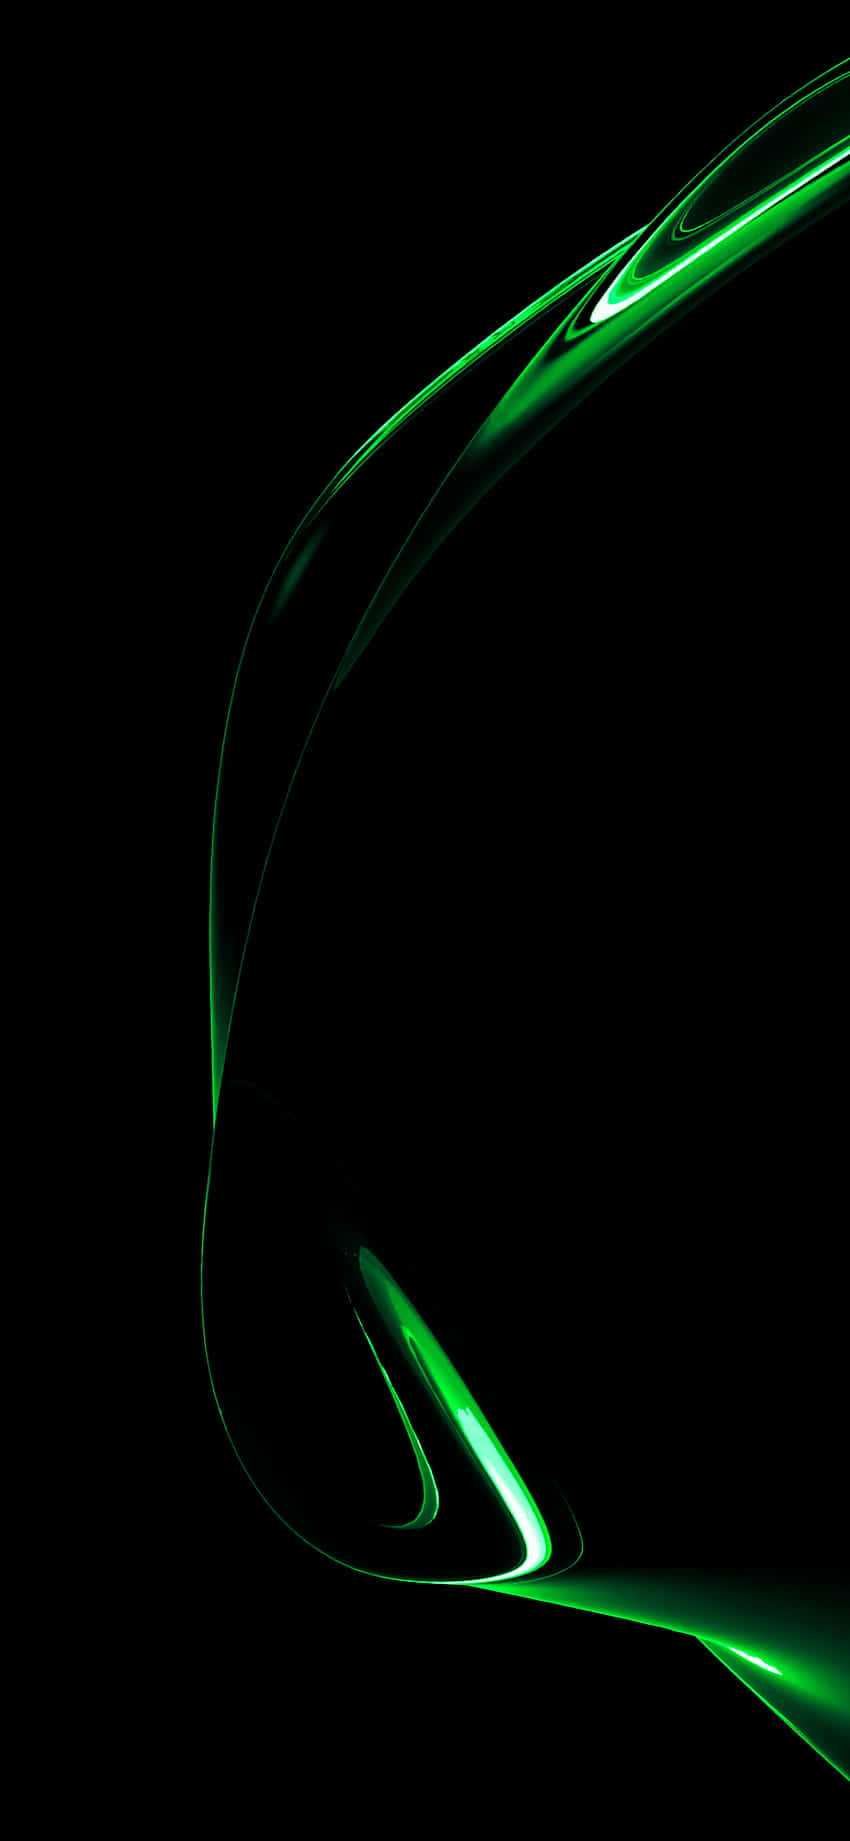 A Green Light Is Shining On A Black Background Wallpaper